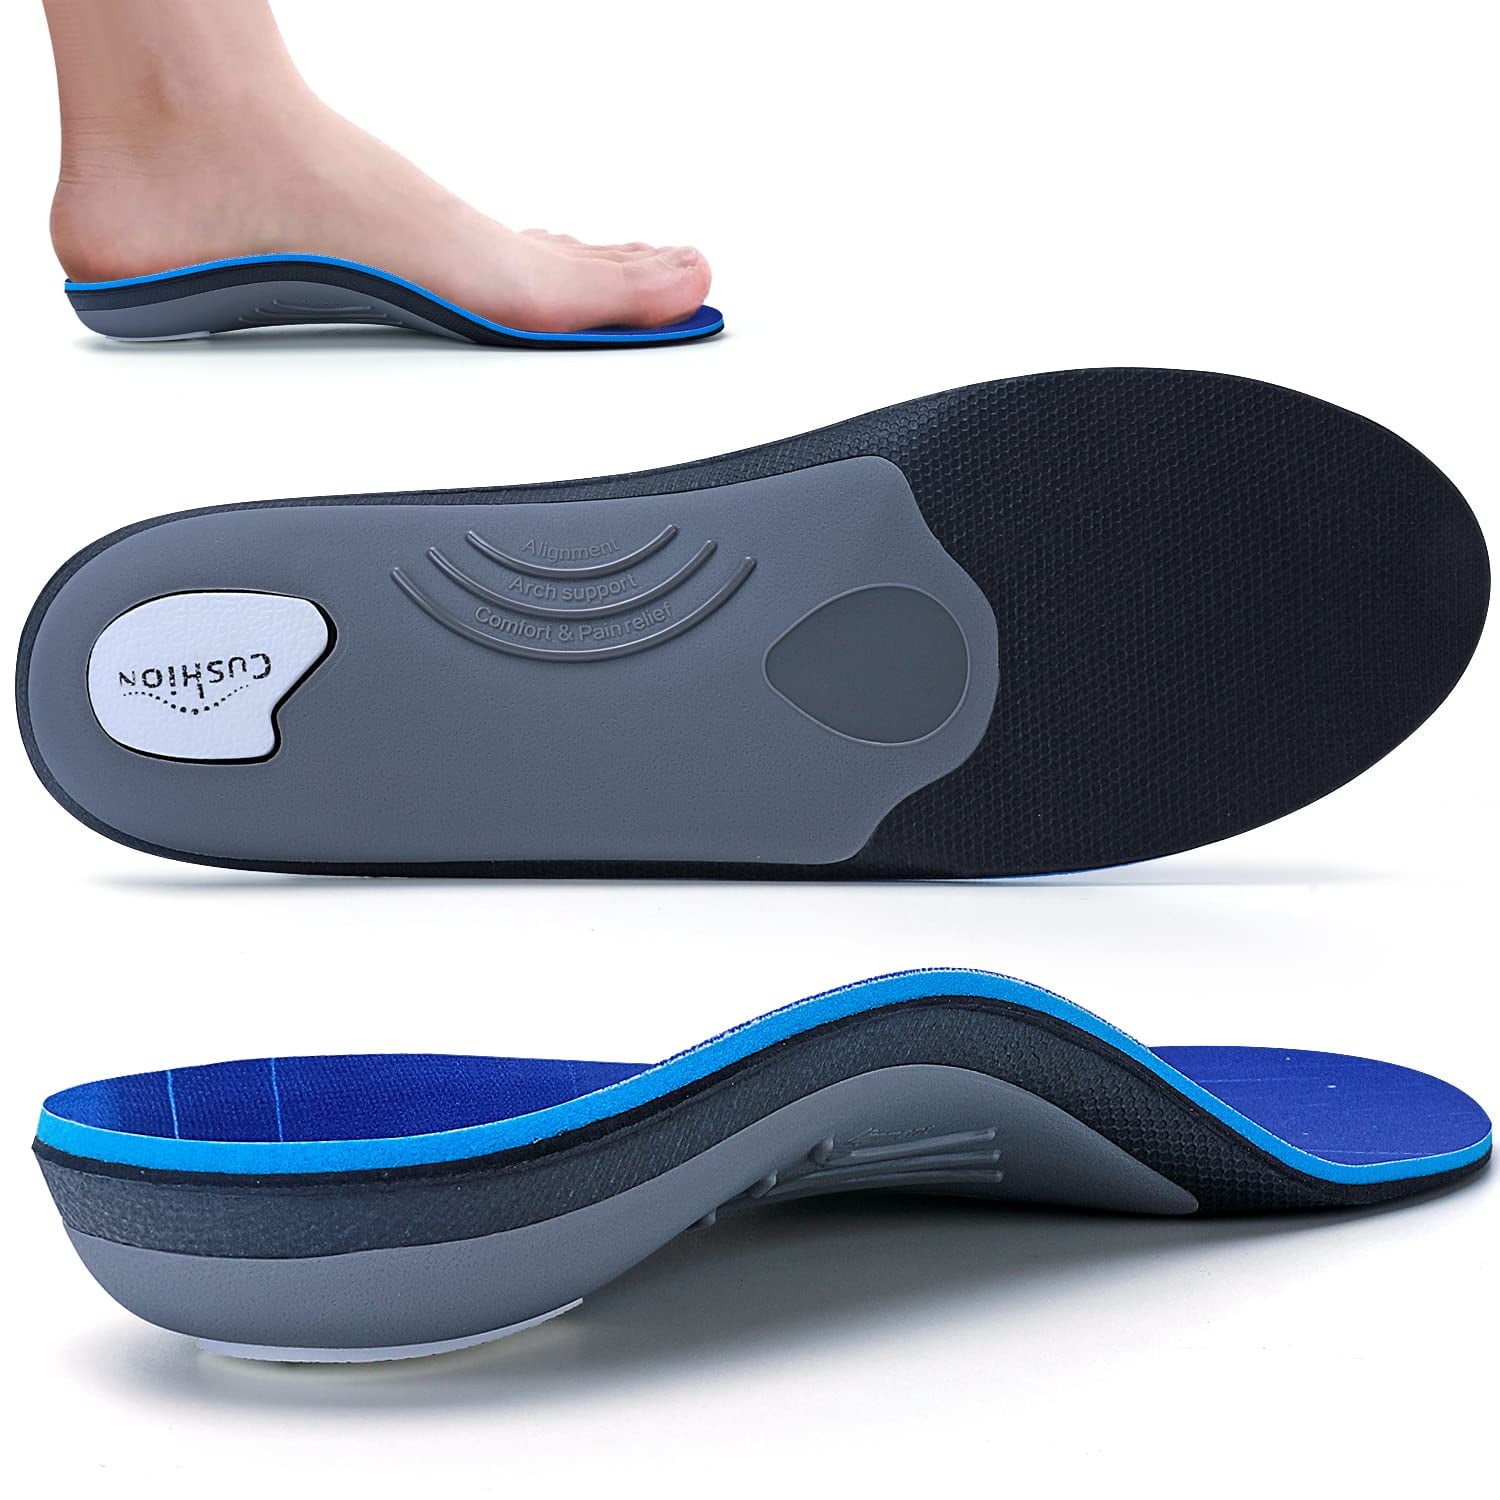 Walkomfy Heavy Duty Support 210+lbs Plantar Fasciitis Insoles for Women ...